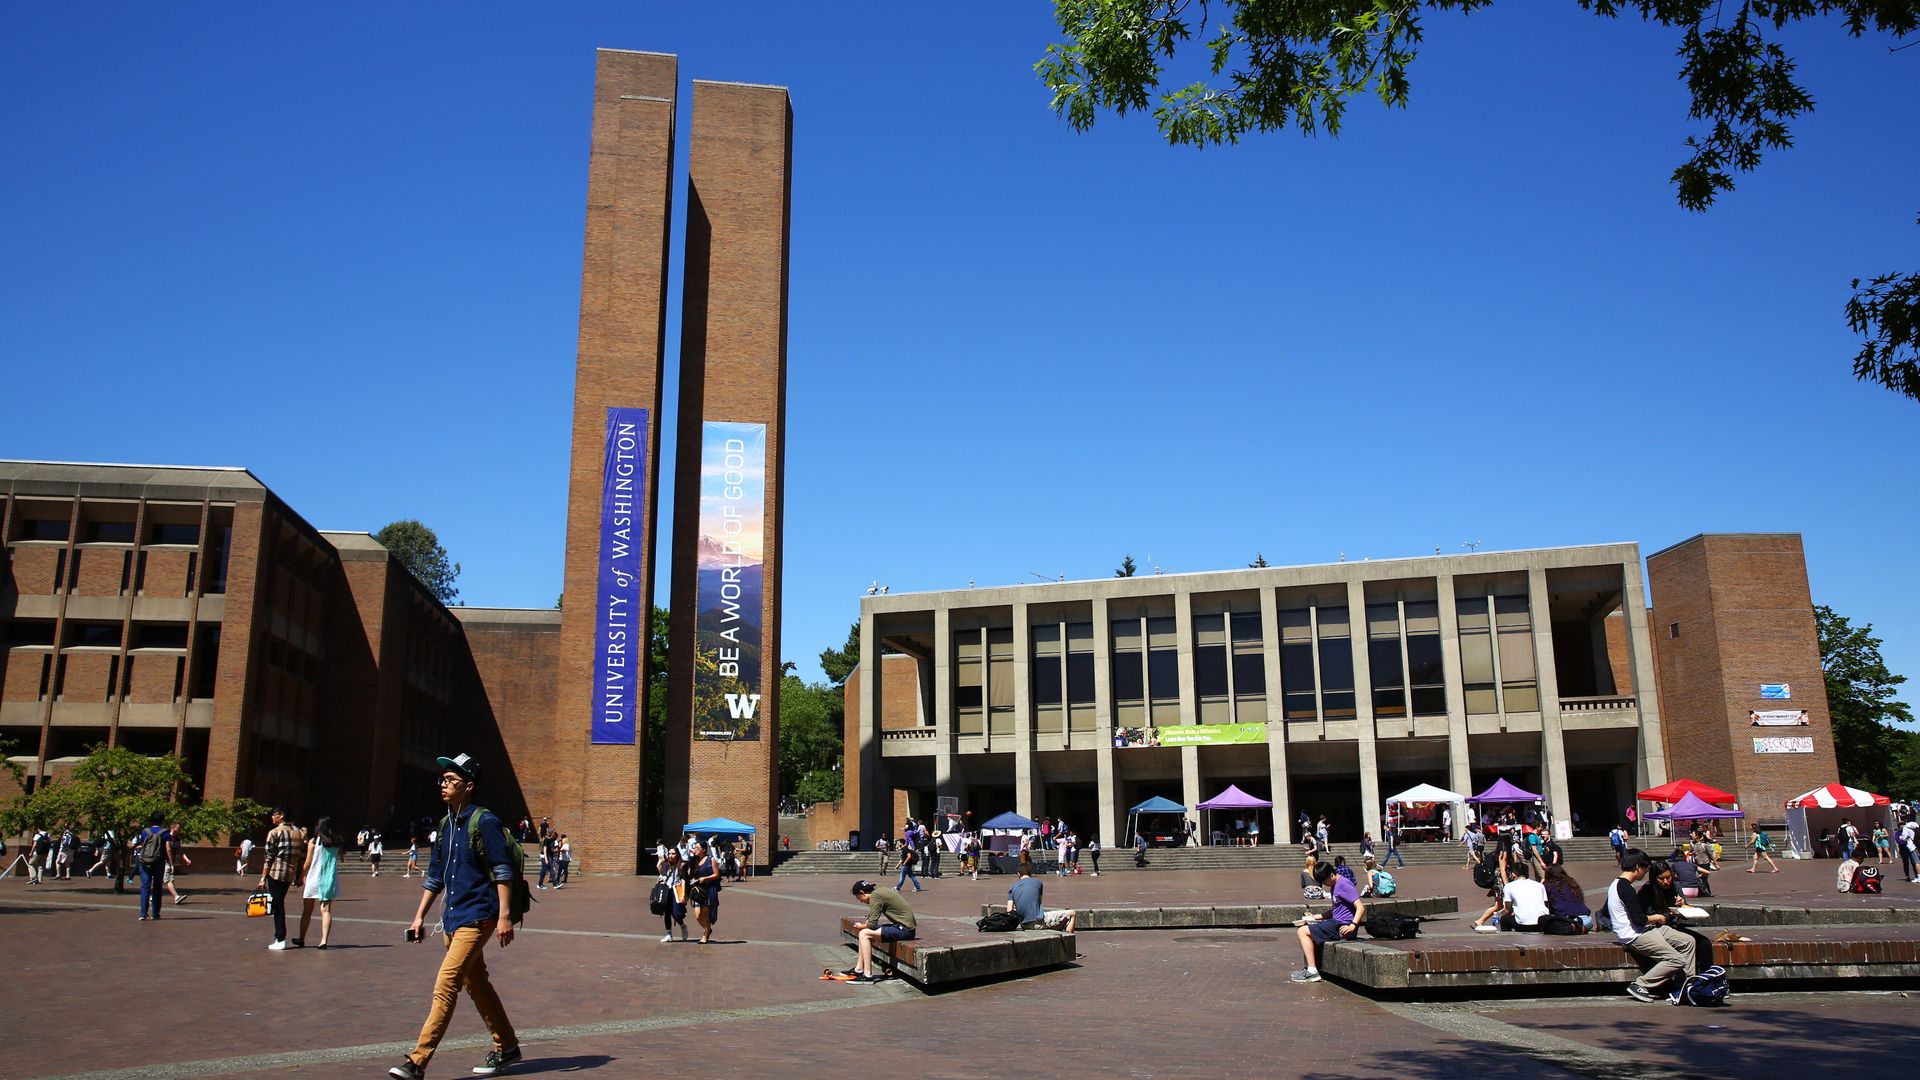 A photo of buildings and students on a university  campus.